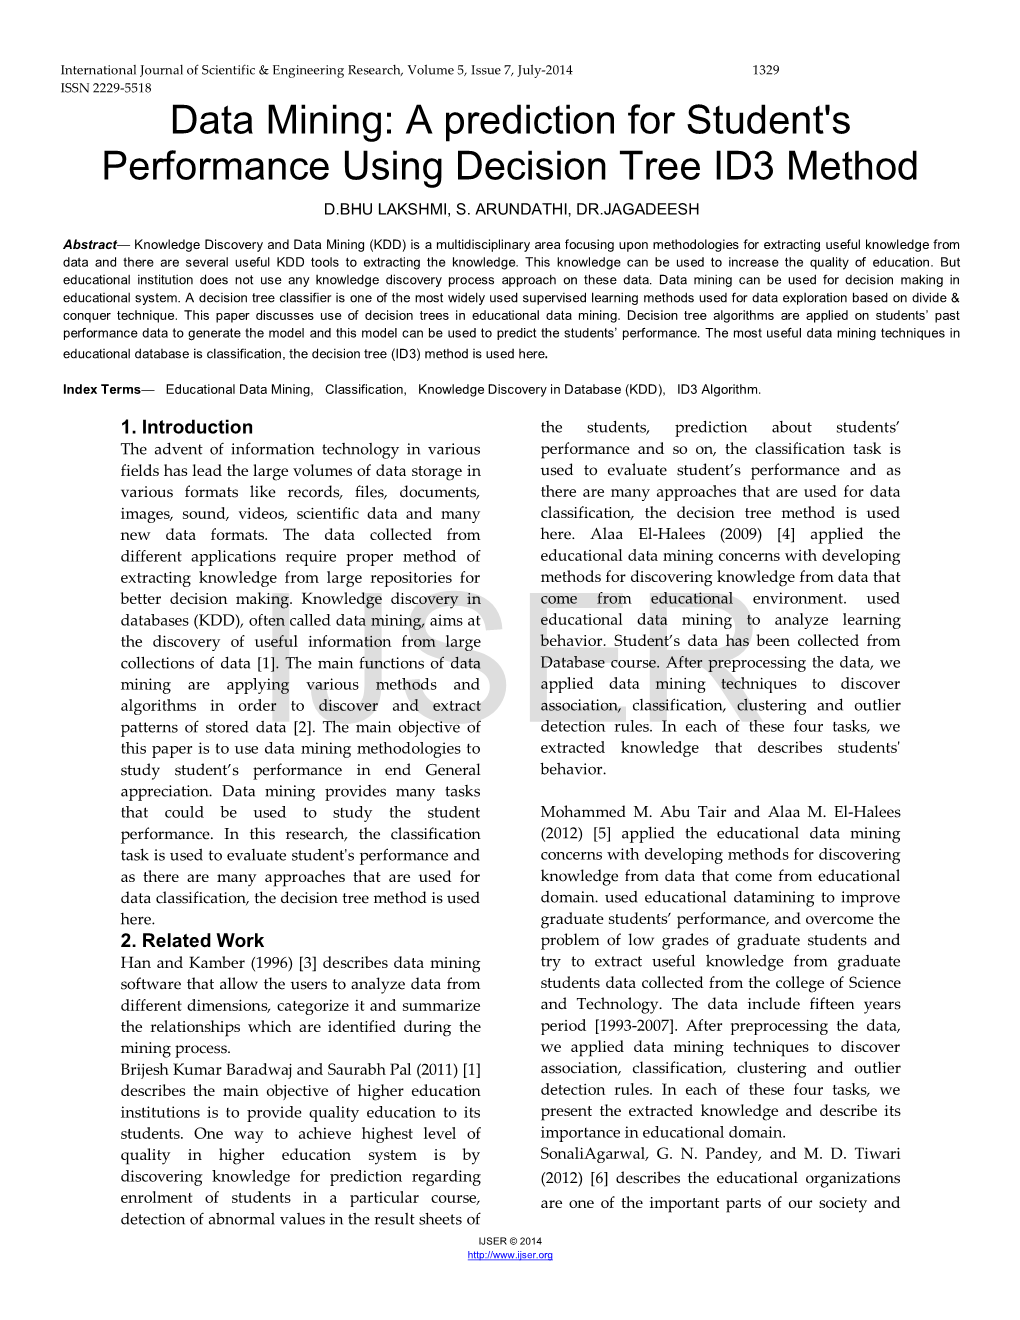 A Prediction for Student's Performance Using Decision Tree ID3 Method